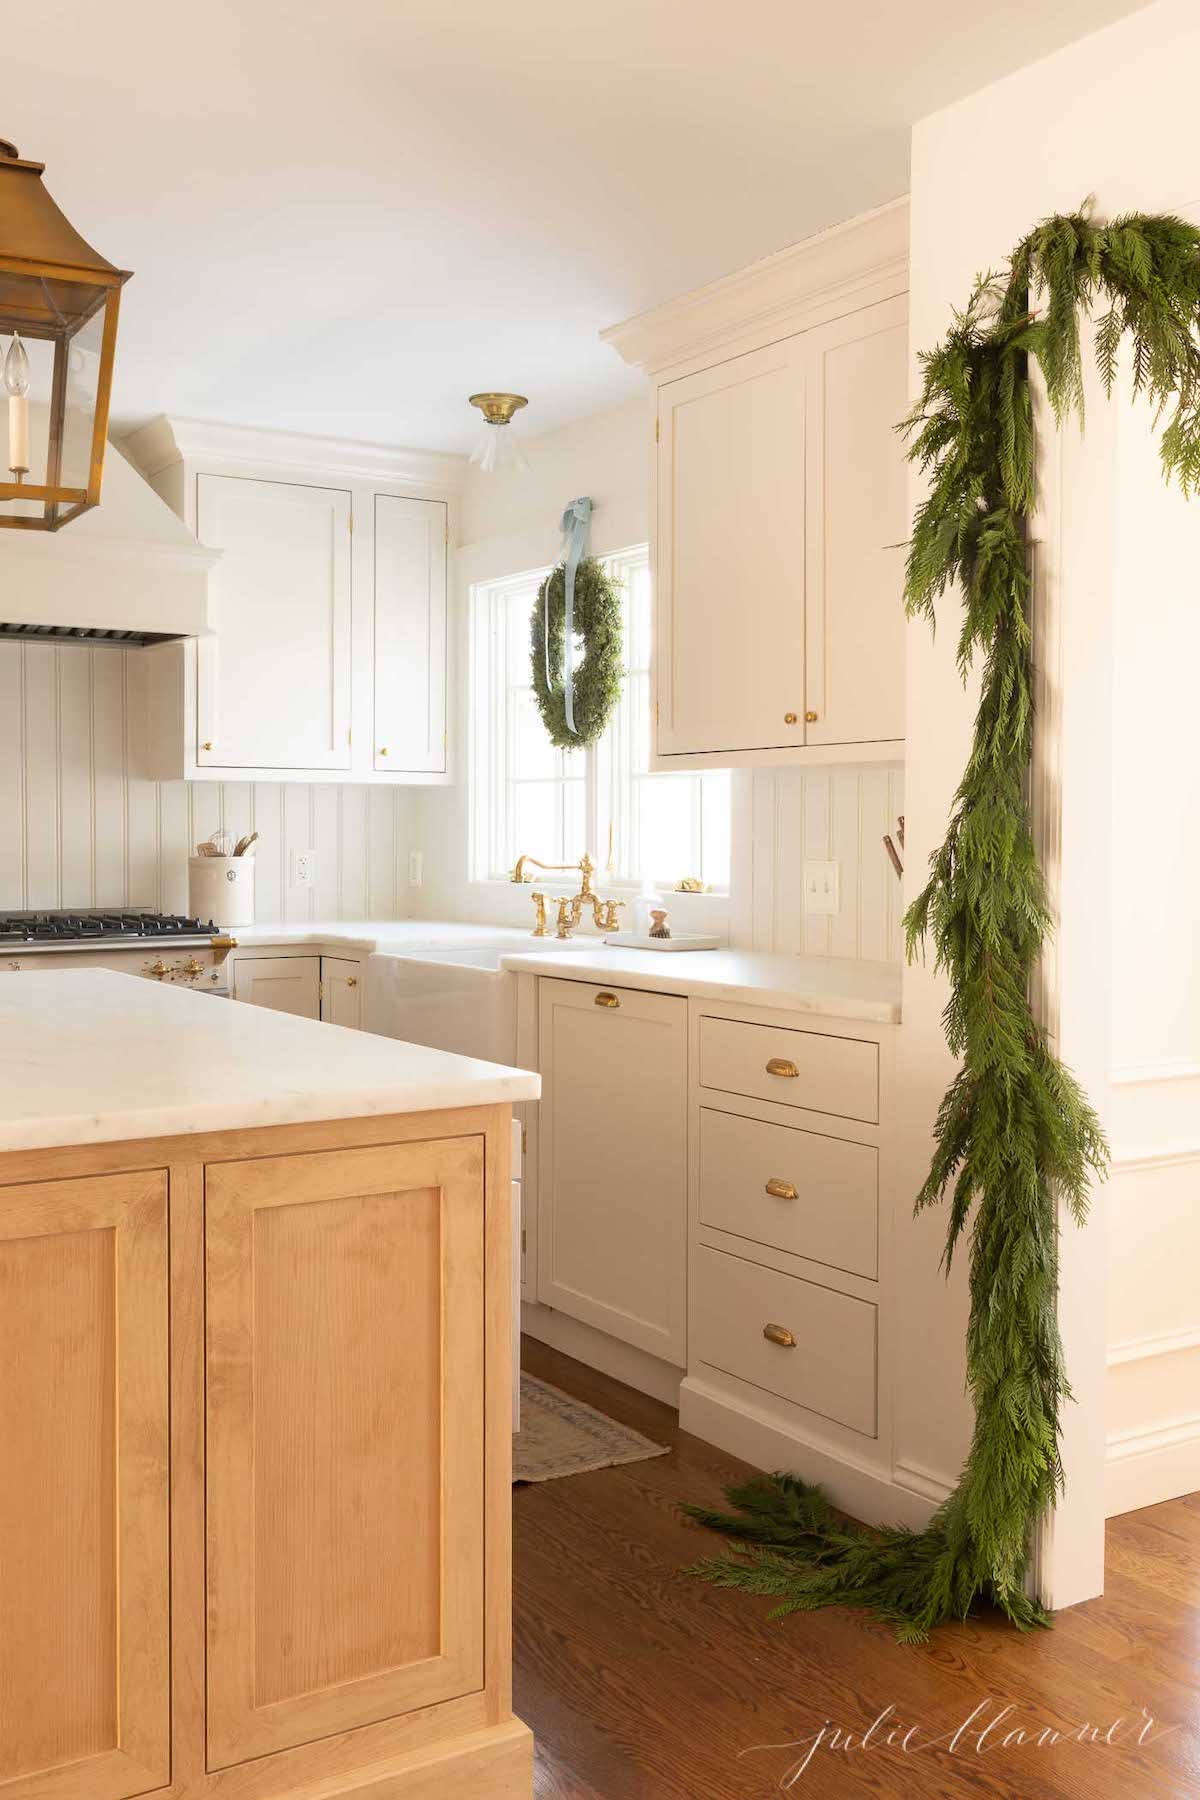 A kitchen adorned with a festive green garland and featuring sleek white cabinets.